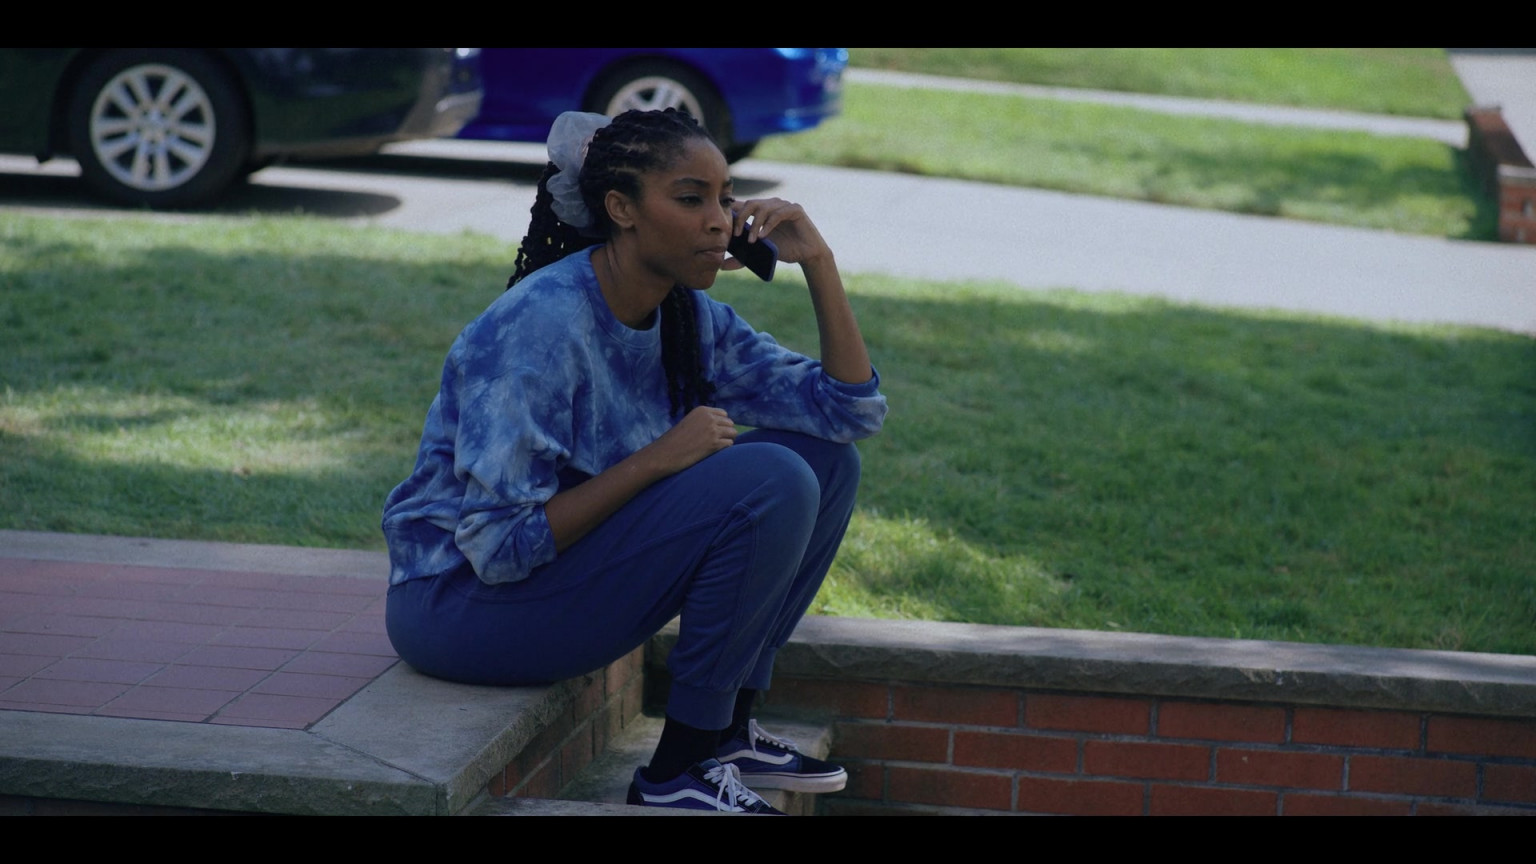 Vans Shoes Of Jessica Williams As Mia Hines In Love Life S02E07 ...